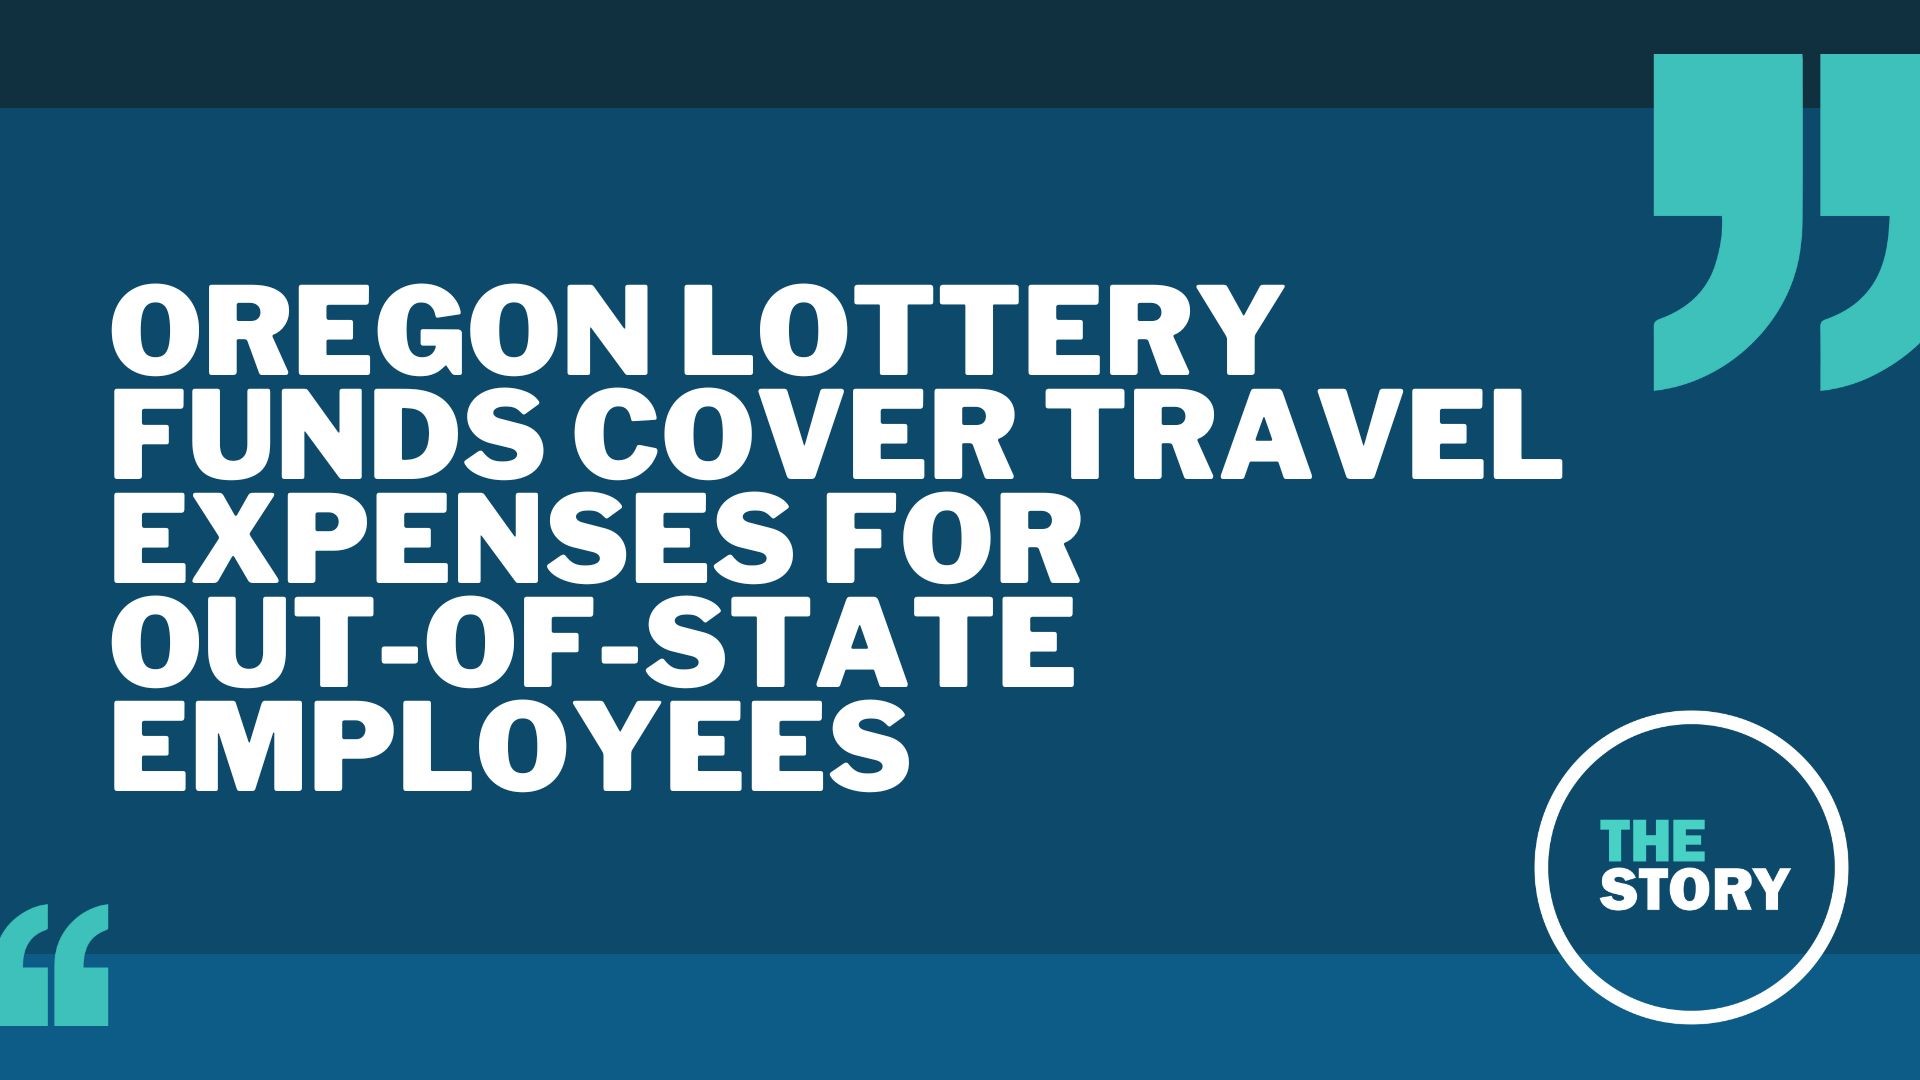 Two of the Oregon Lottery's top employees live in states where they aren't required to pay income taxes — and they use lottery funds to cover travel costs.